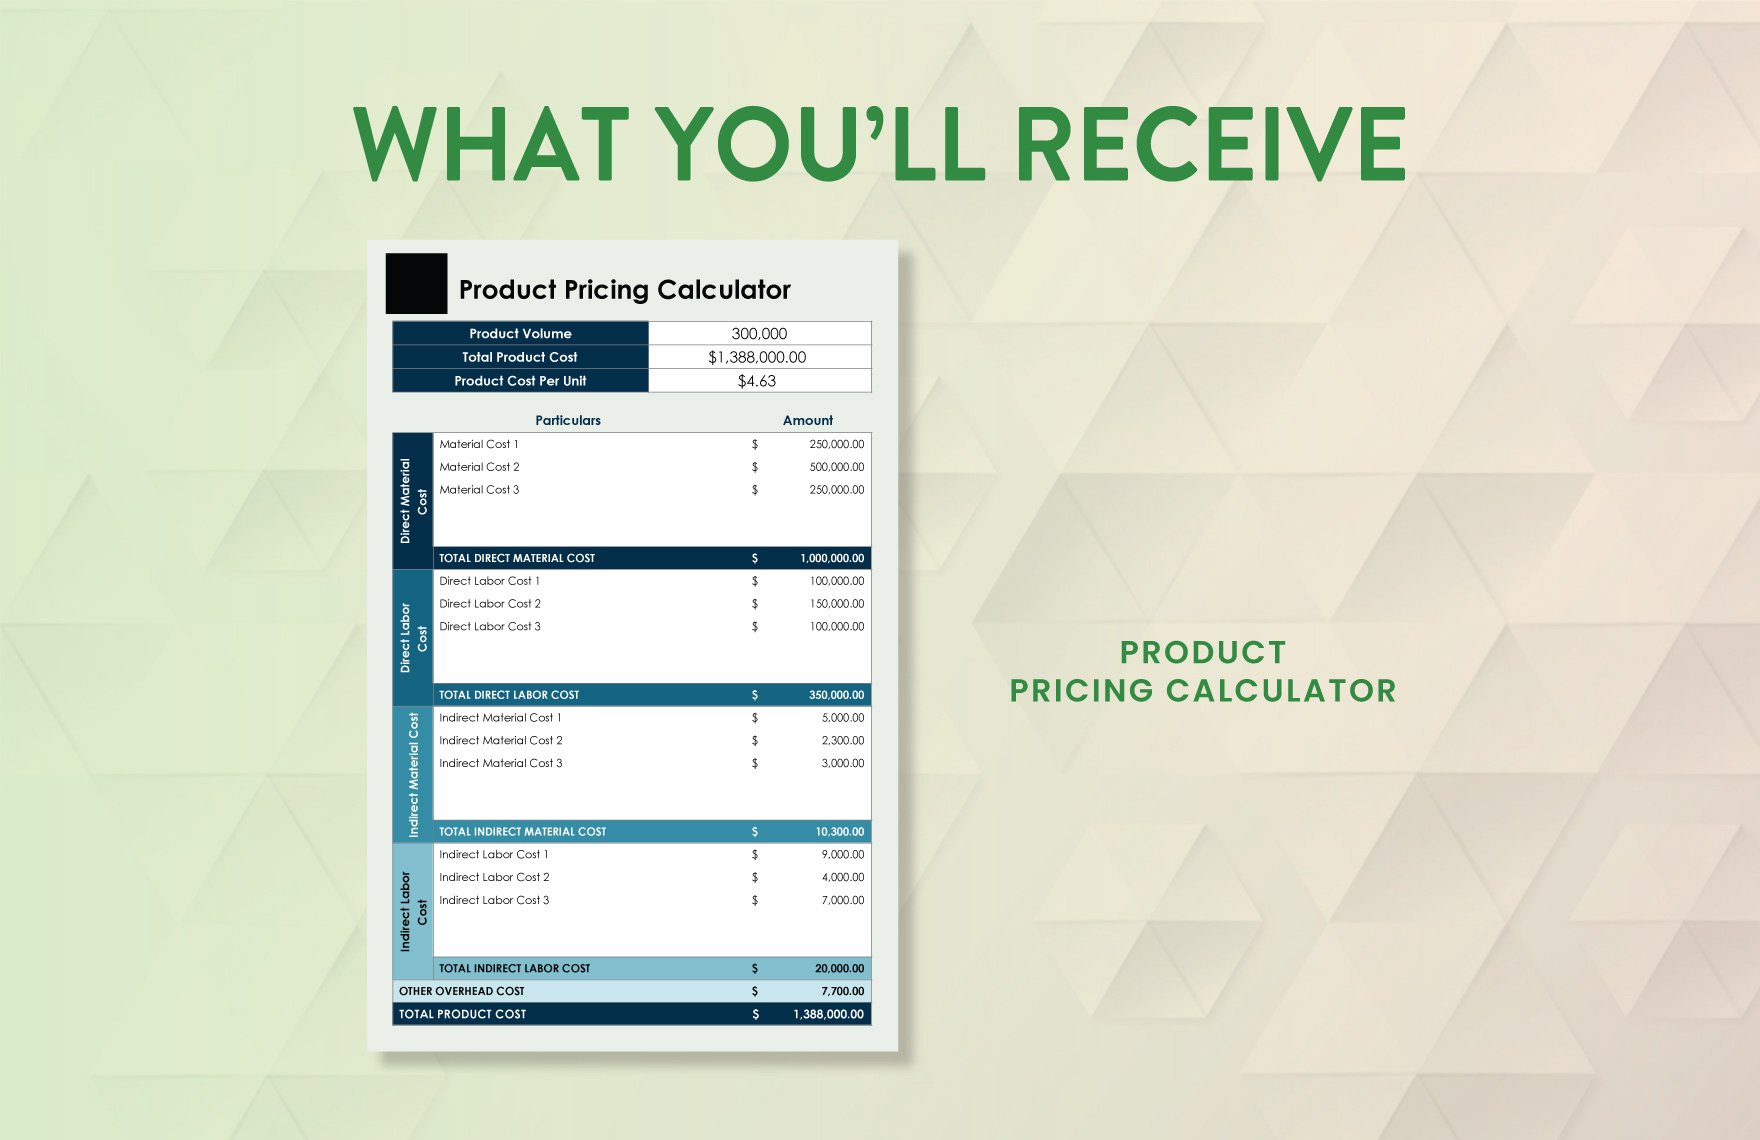 Product Pricing Calculator